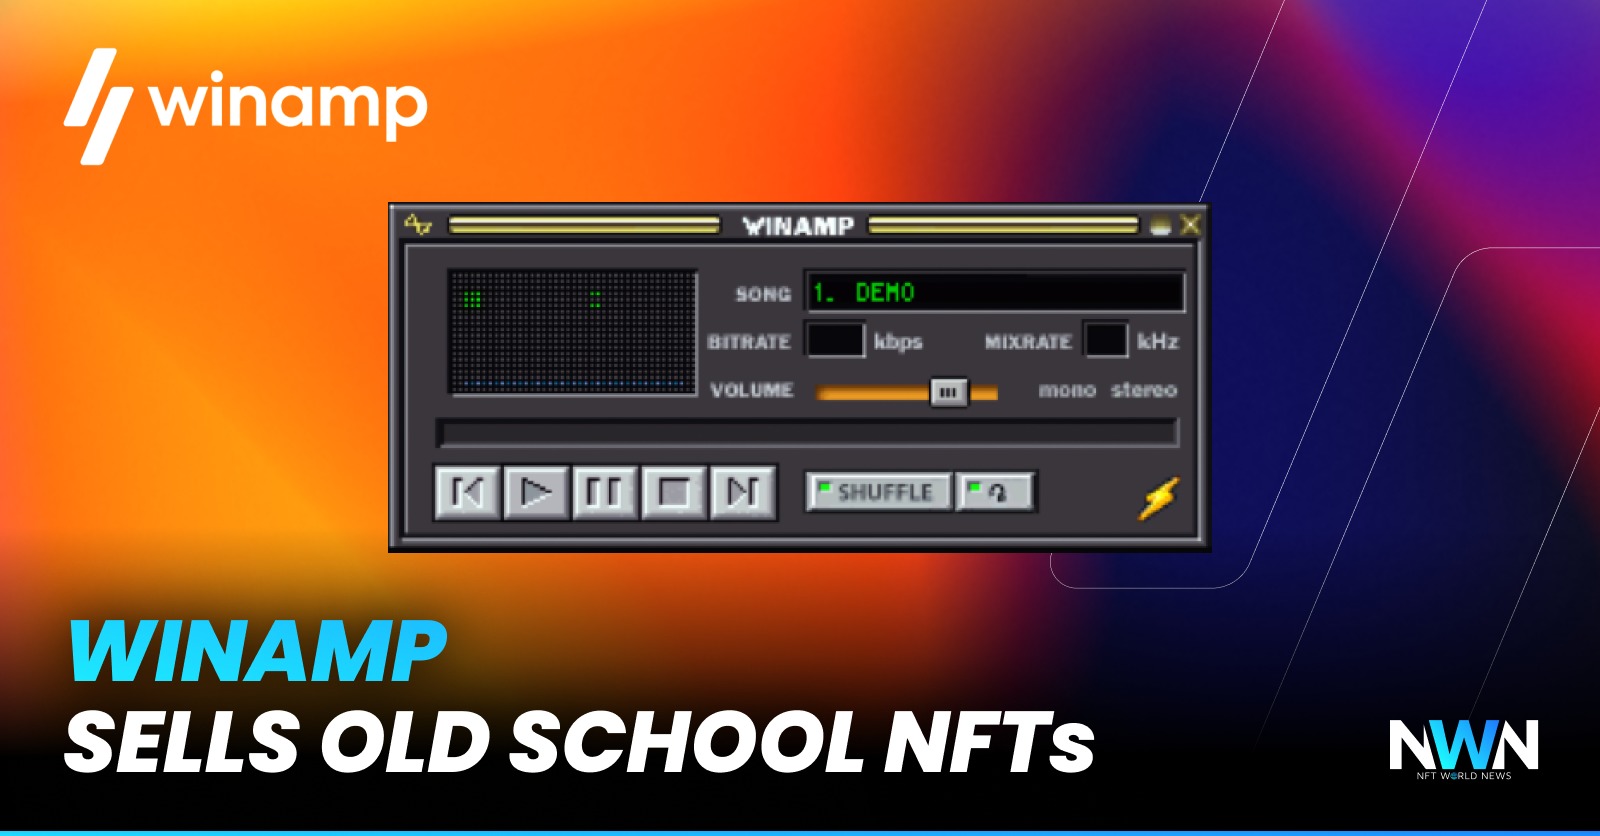 Winamp media player skin were sold as NFTs